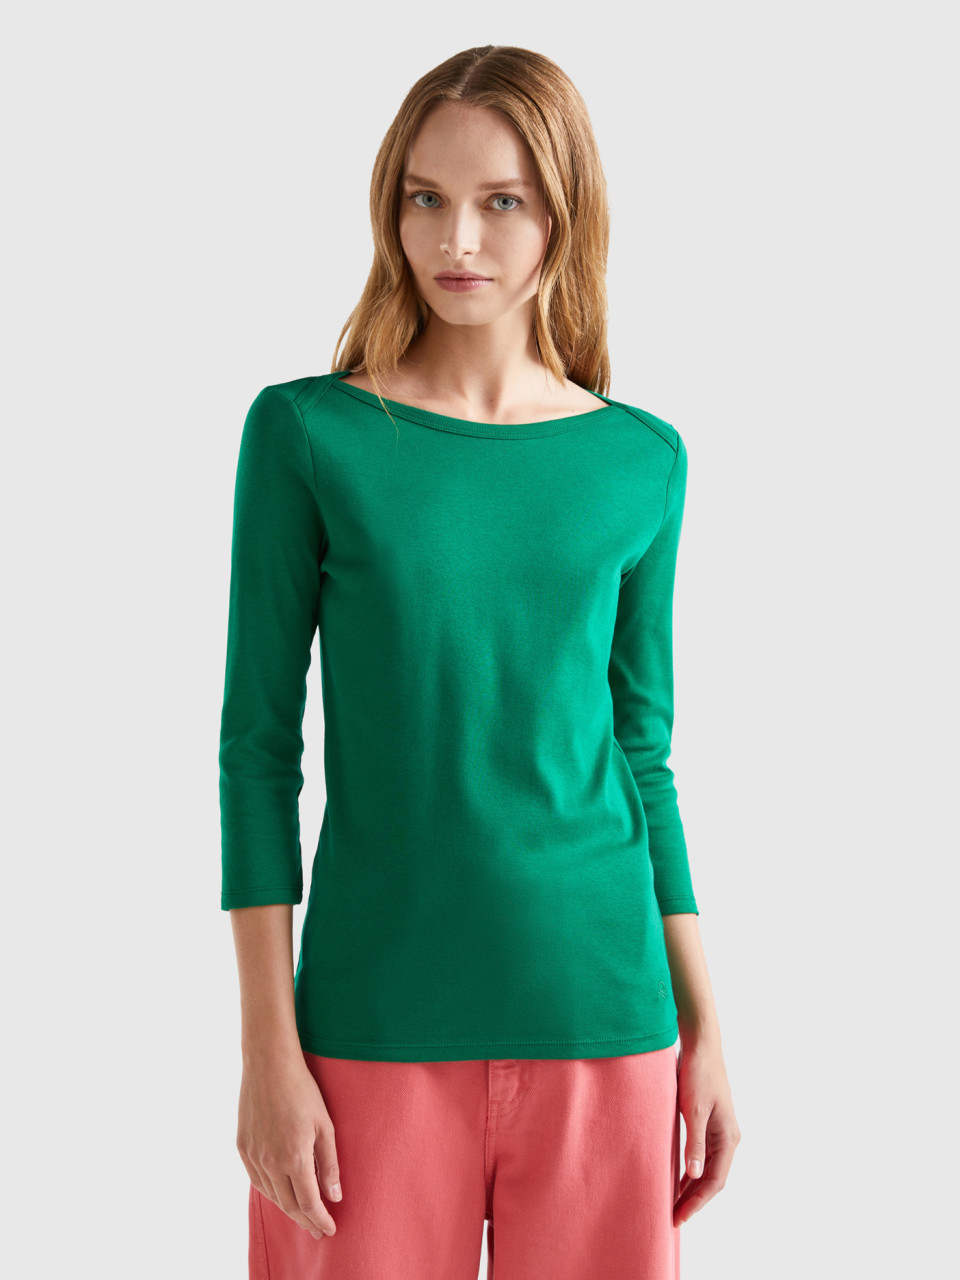 Benetton, T-shirt With Boat Neck In 100% Cotton, Green, Women